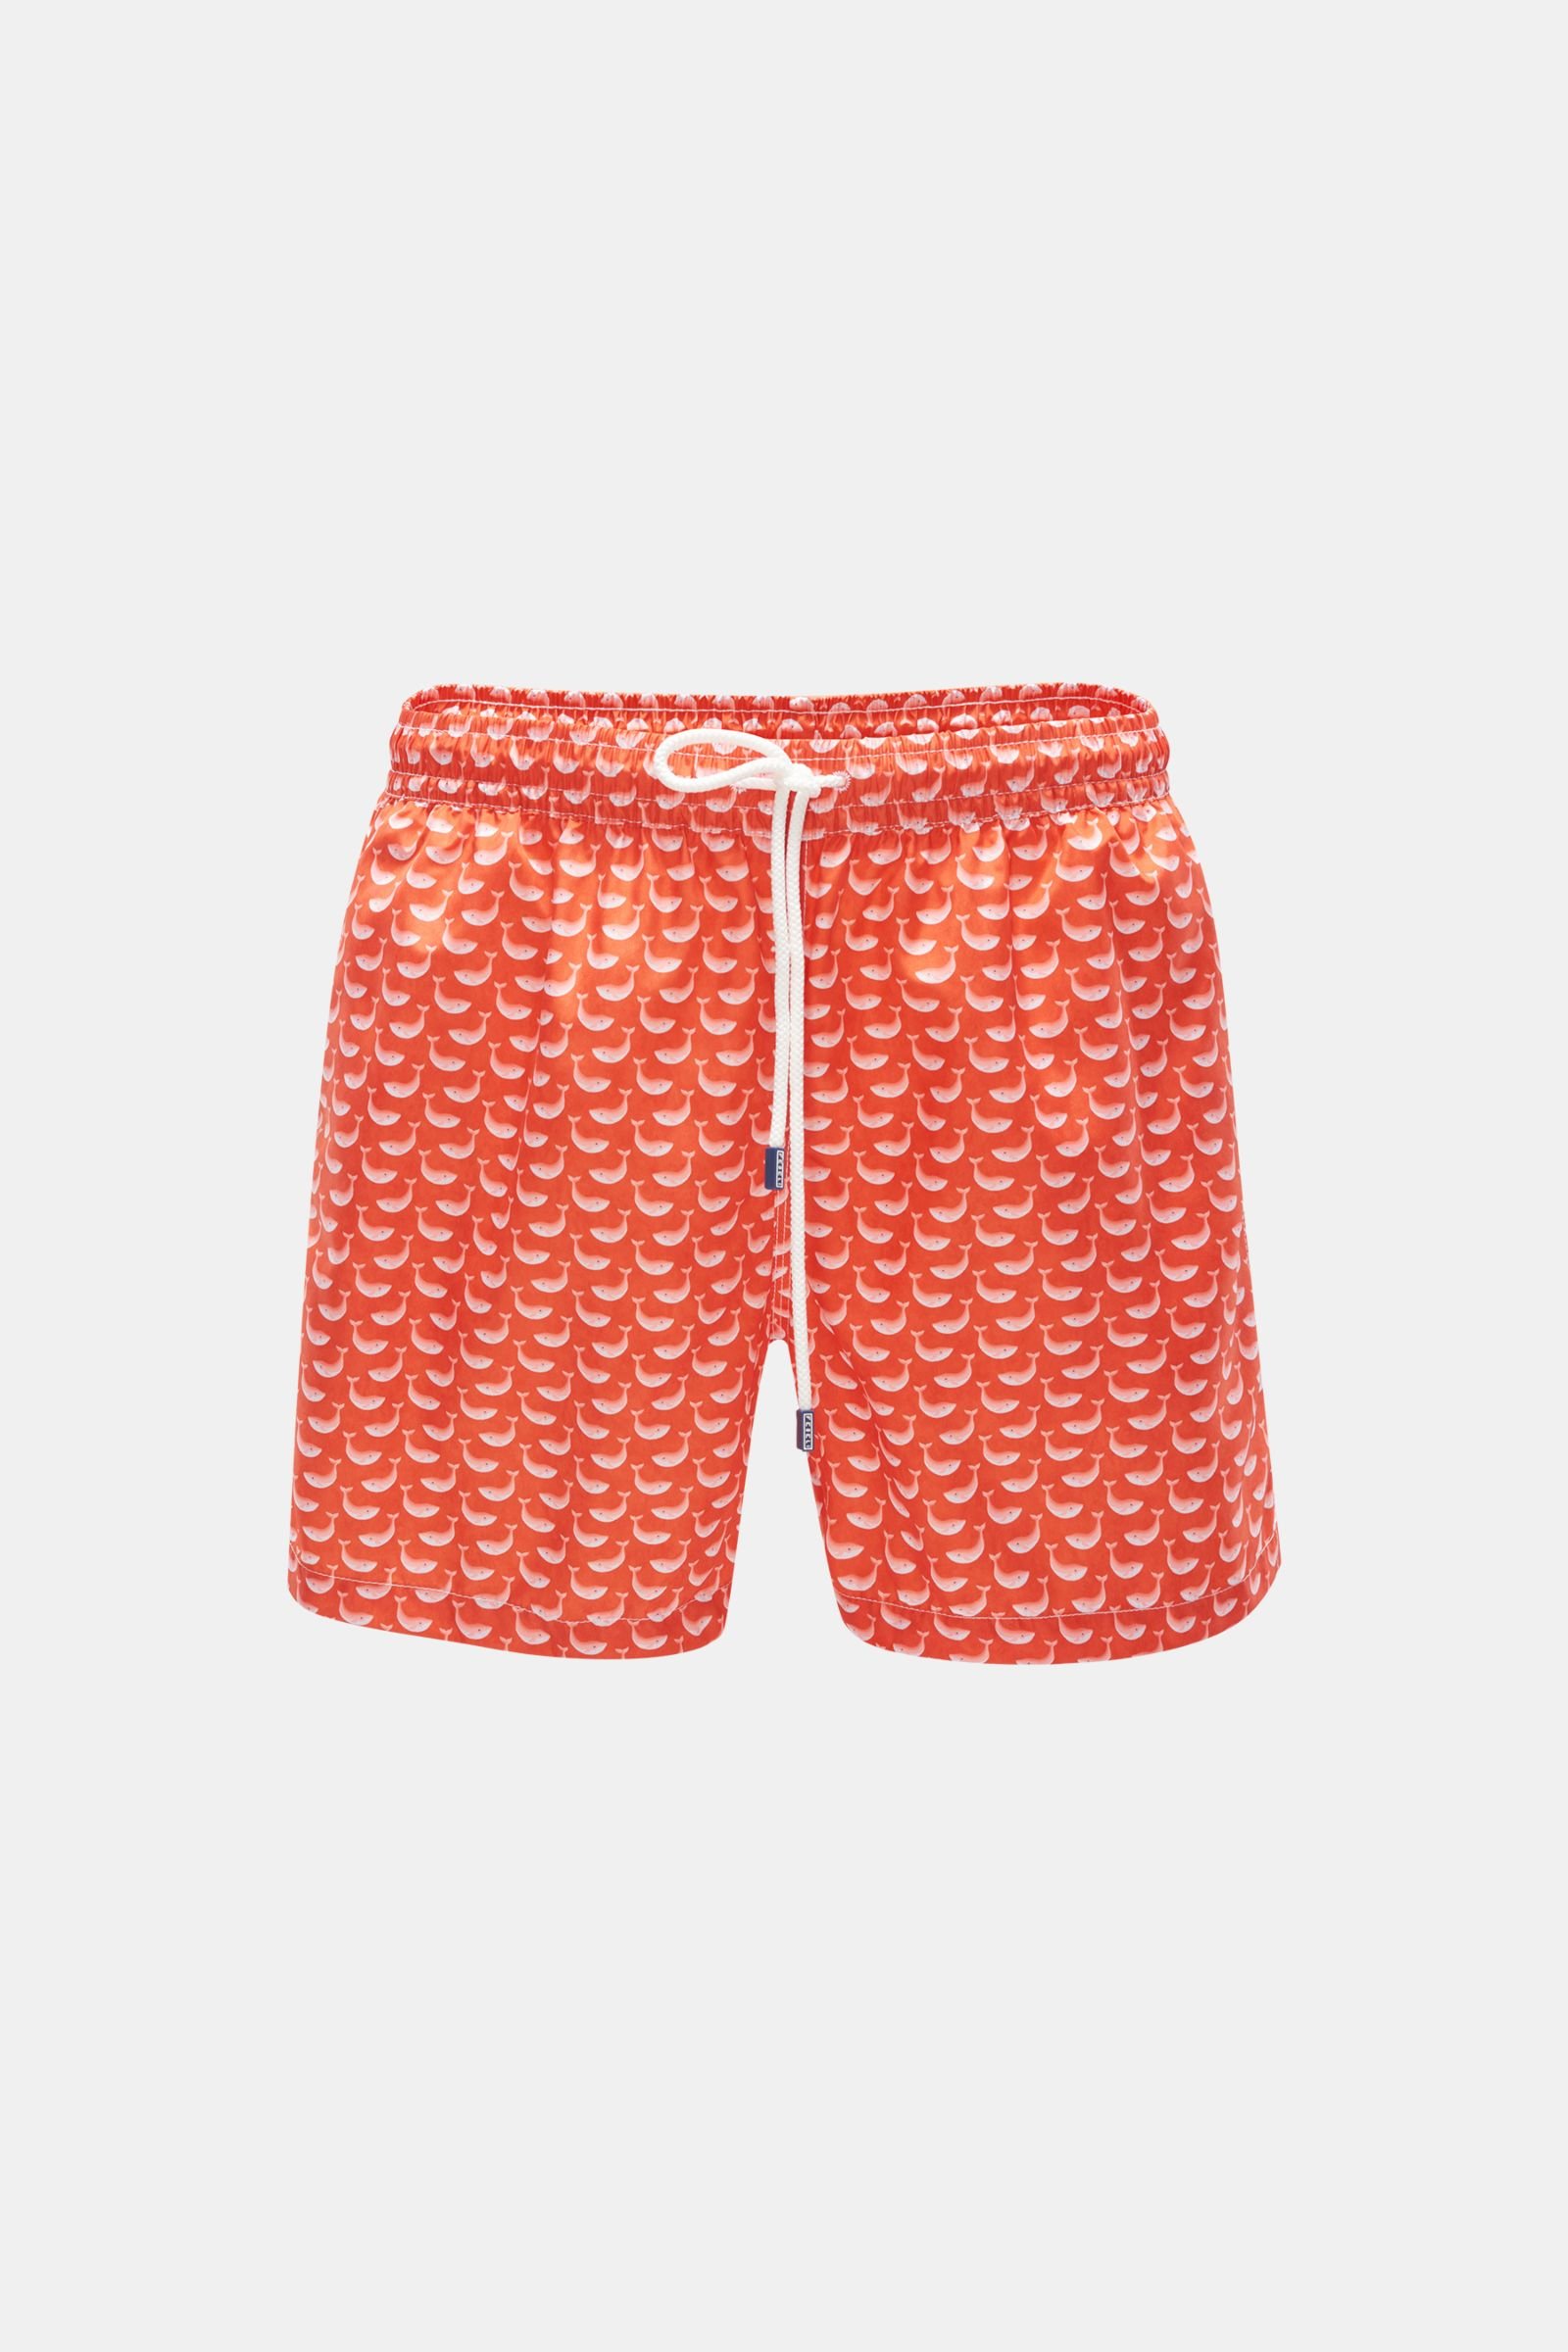 Swim shorts 'Madeira Airstop' coral patterned